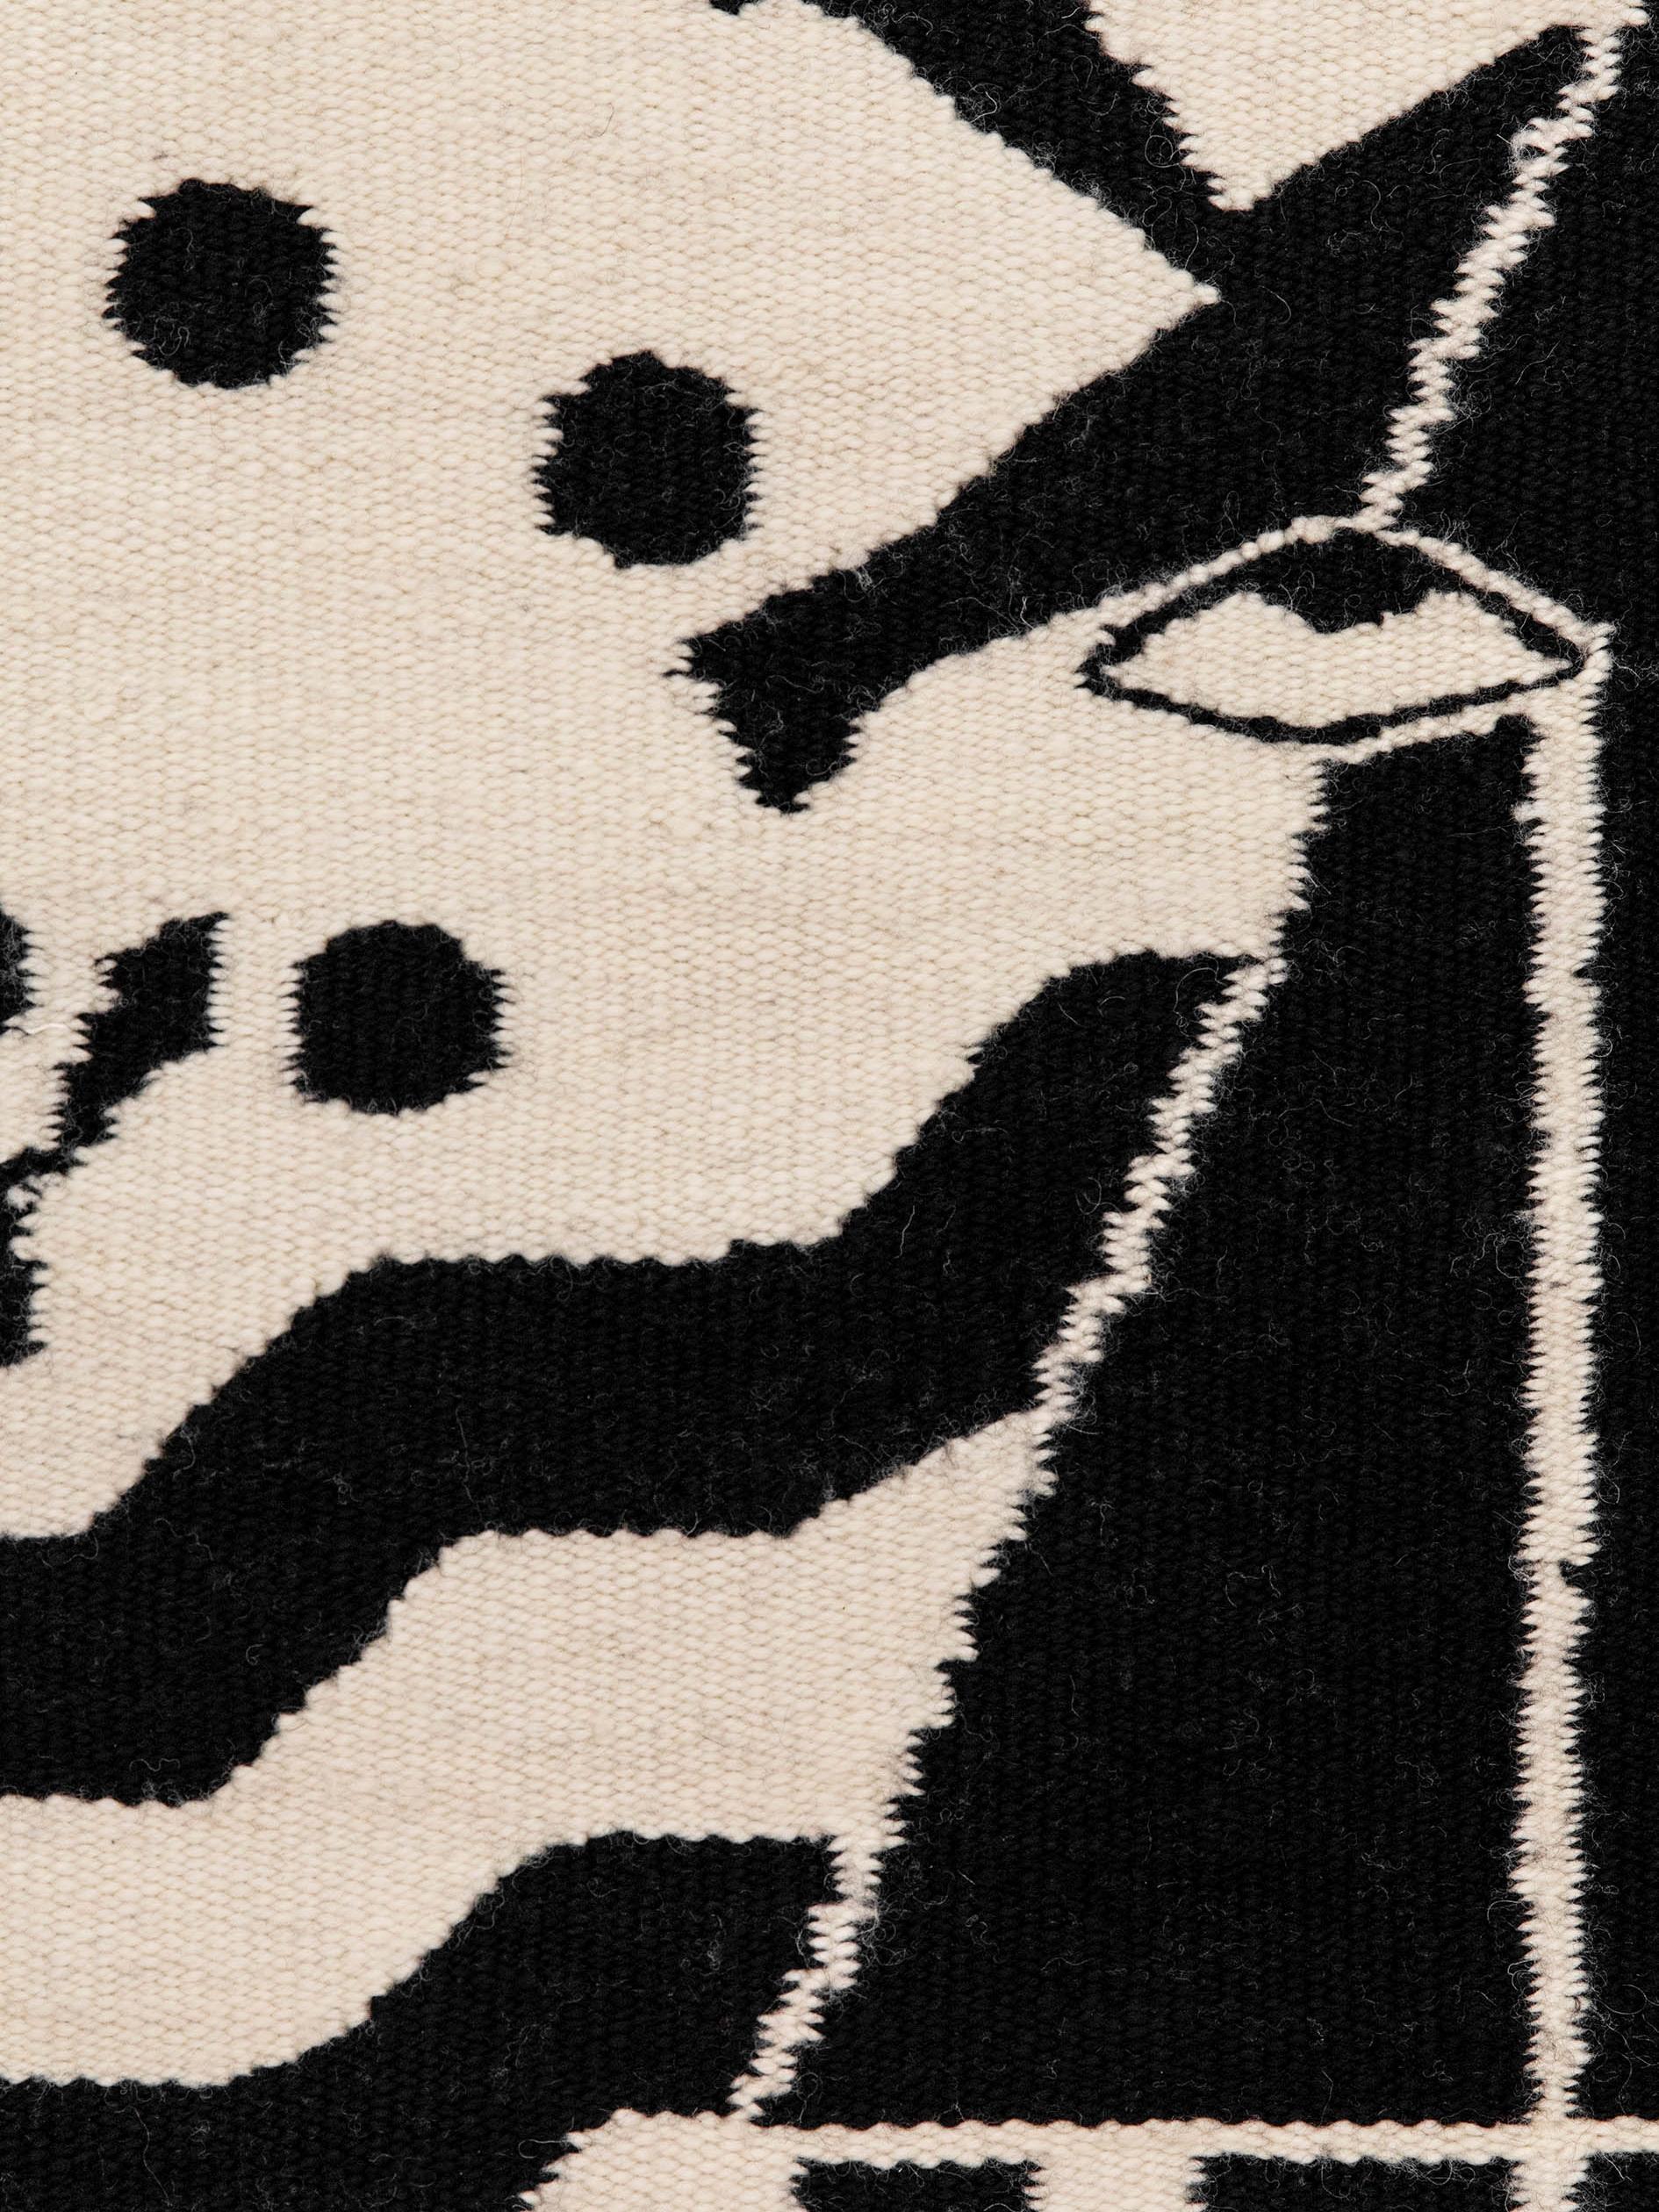 Adapted from the original artwork by Juan Stoppani & Jean-Yves Legavre, L'Egyptien, 2020.

LALANA RUGS is an applied arts initiative born from the desire to combine proposals by contemporary artists with traditional local techniques and noble